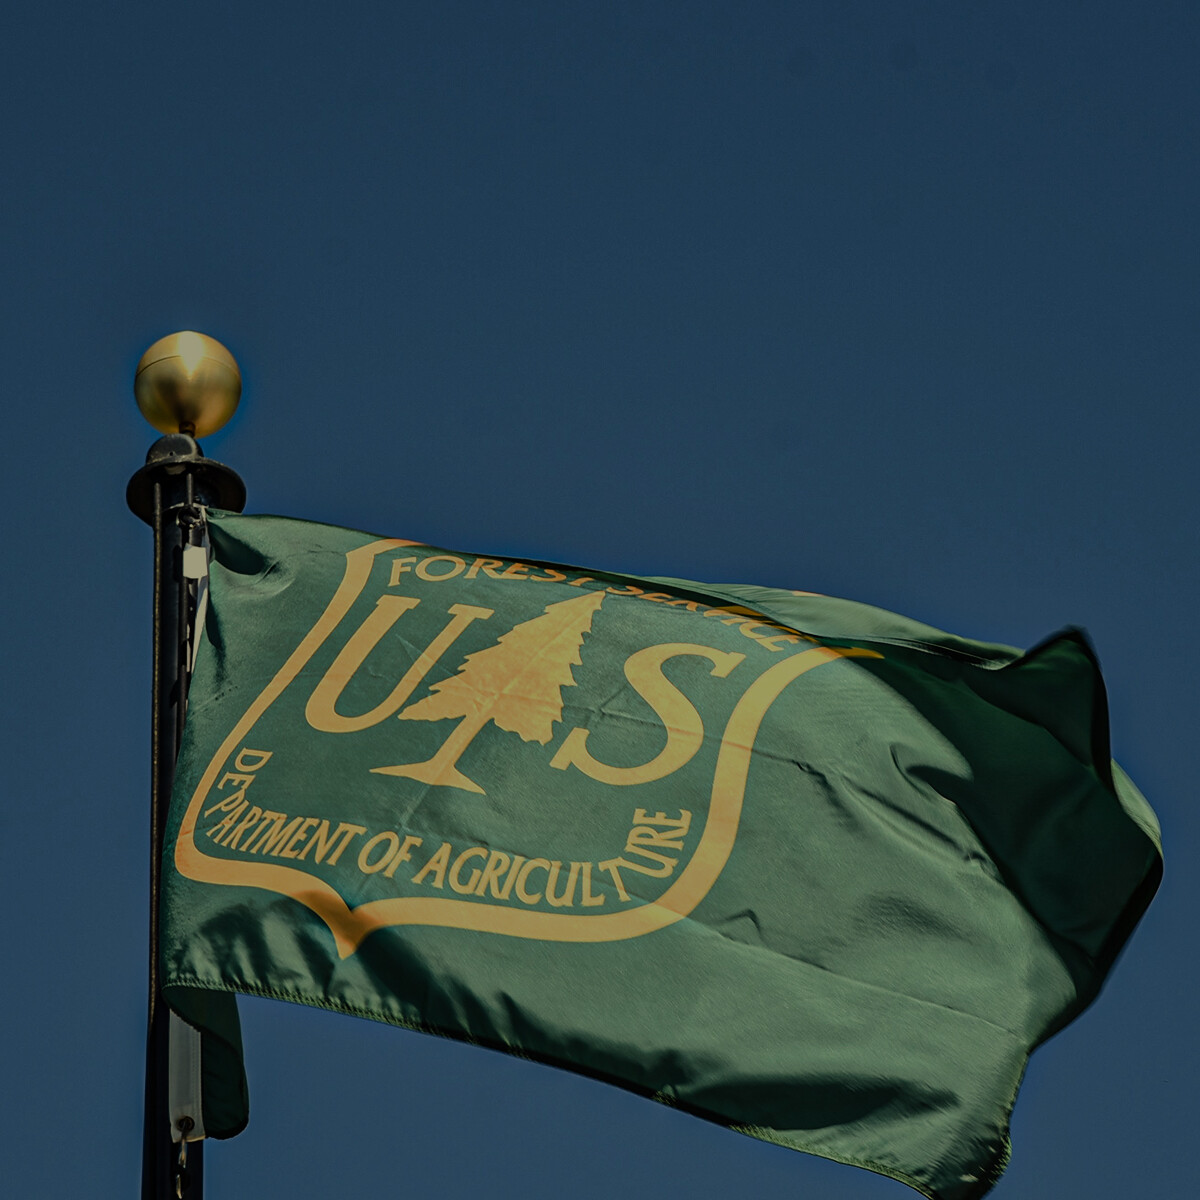 Roosevelt Arizona 9/28/19 US Forest Service flag a division of the US Agriculture Department